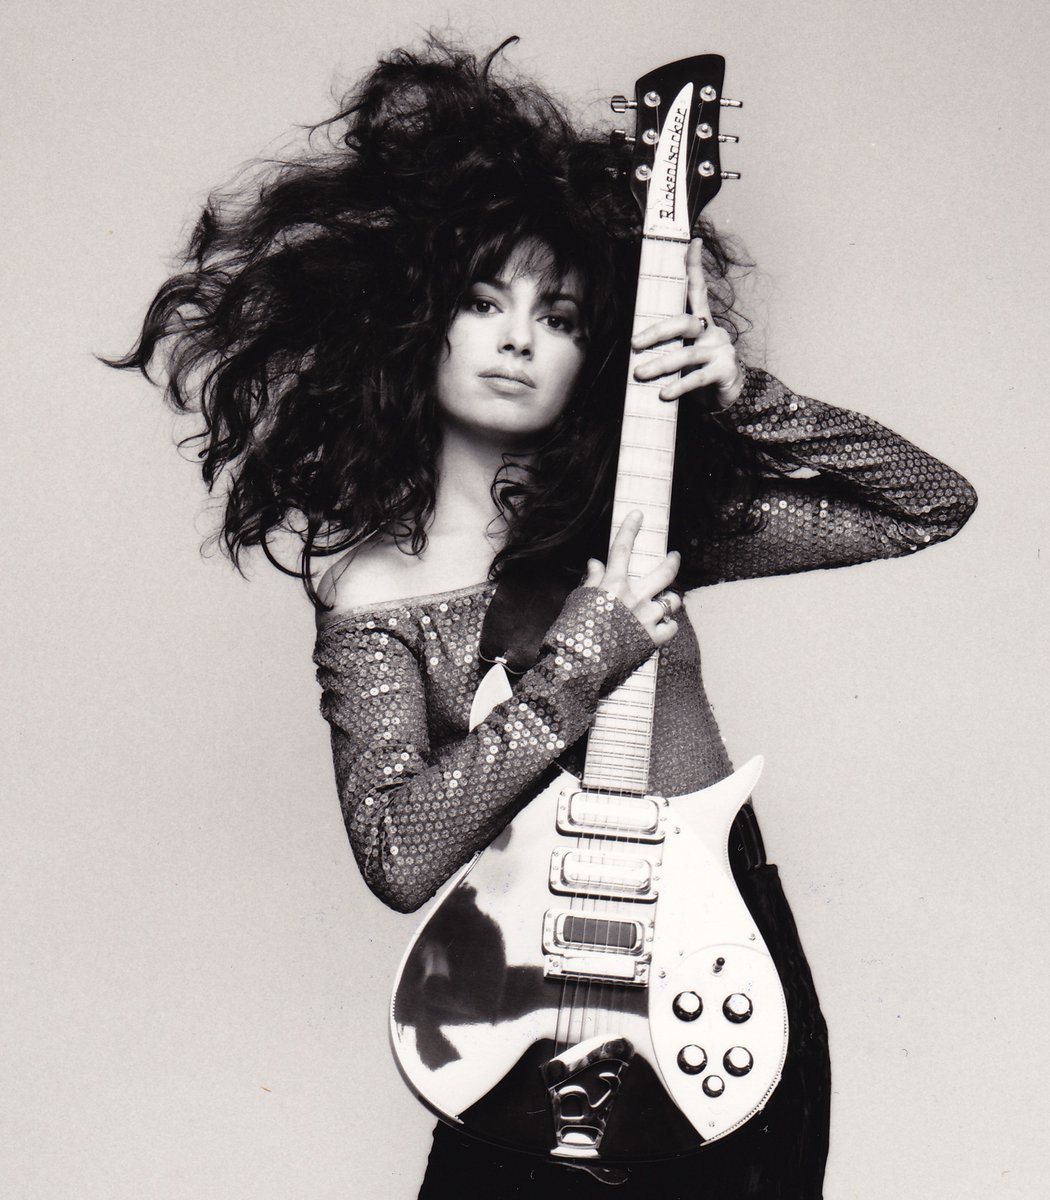 When the hair was almost as big as the guitar.
#the80s #FlashbackFriday